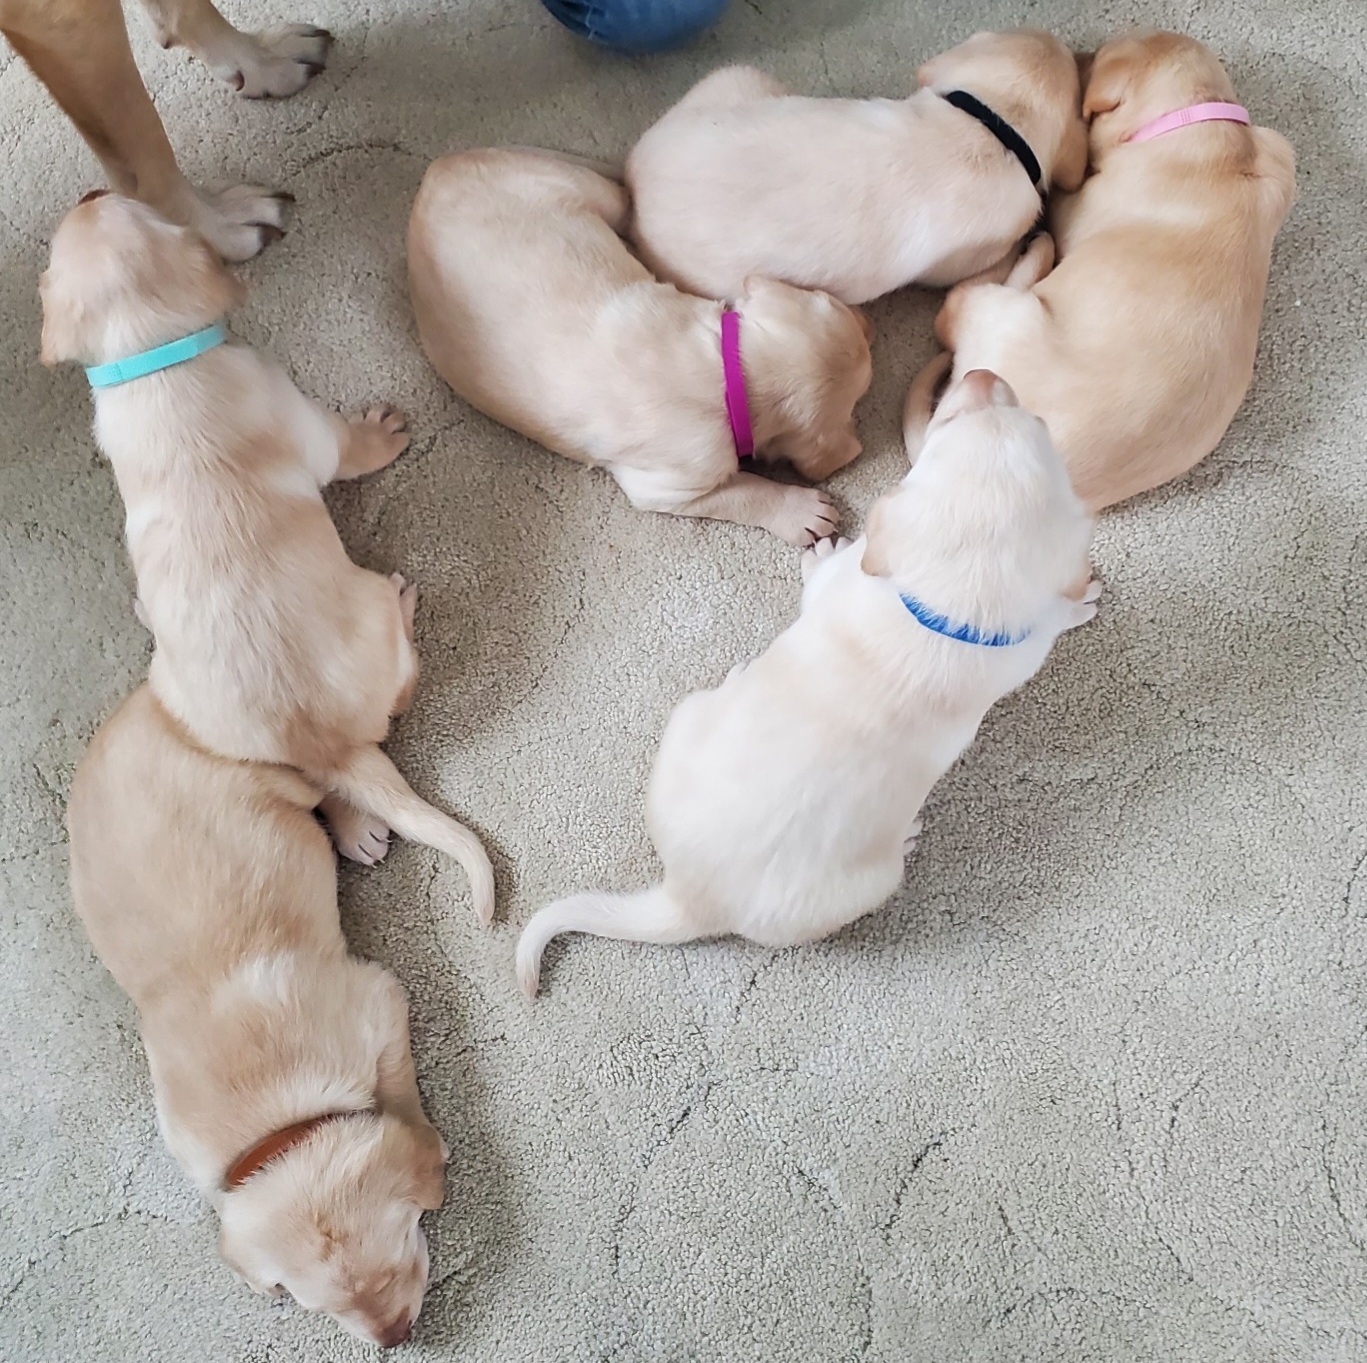 AKC YELLOW LABS Dewclaws removed  AKC YELLOW LABS Dewclaws removed first shot And vet check will be done 3 males 3 females Ready Dec. 21 Call or text 208-818-4335 CDA